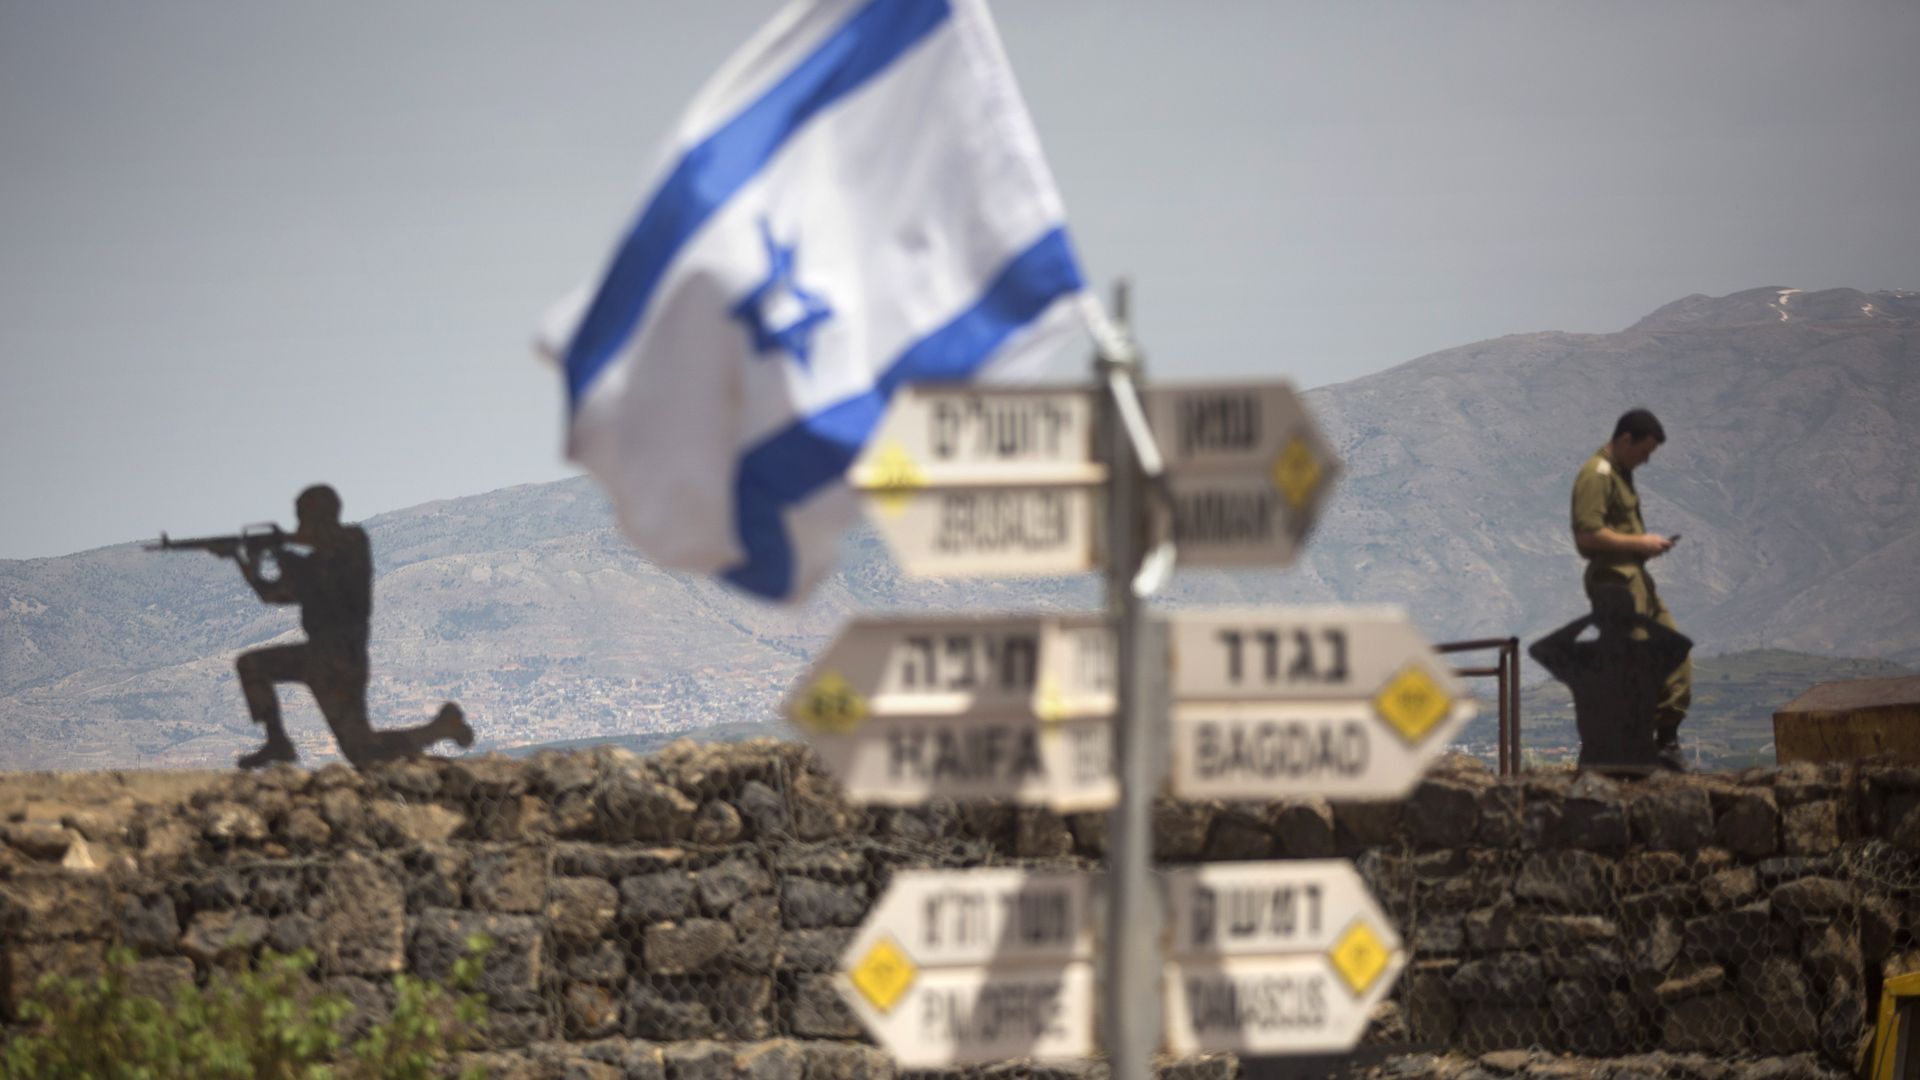  Israeli soldier is seen next to a signs pointing out distance to different cities on Mount Bental next to the Syrian border on May 10, 2018 in the Israeli-annexed Golan Heights. 